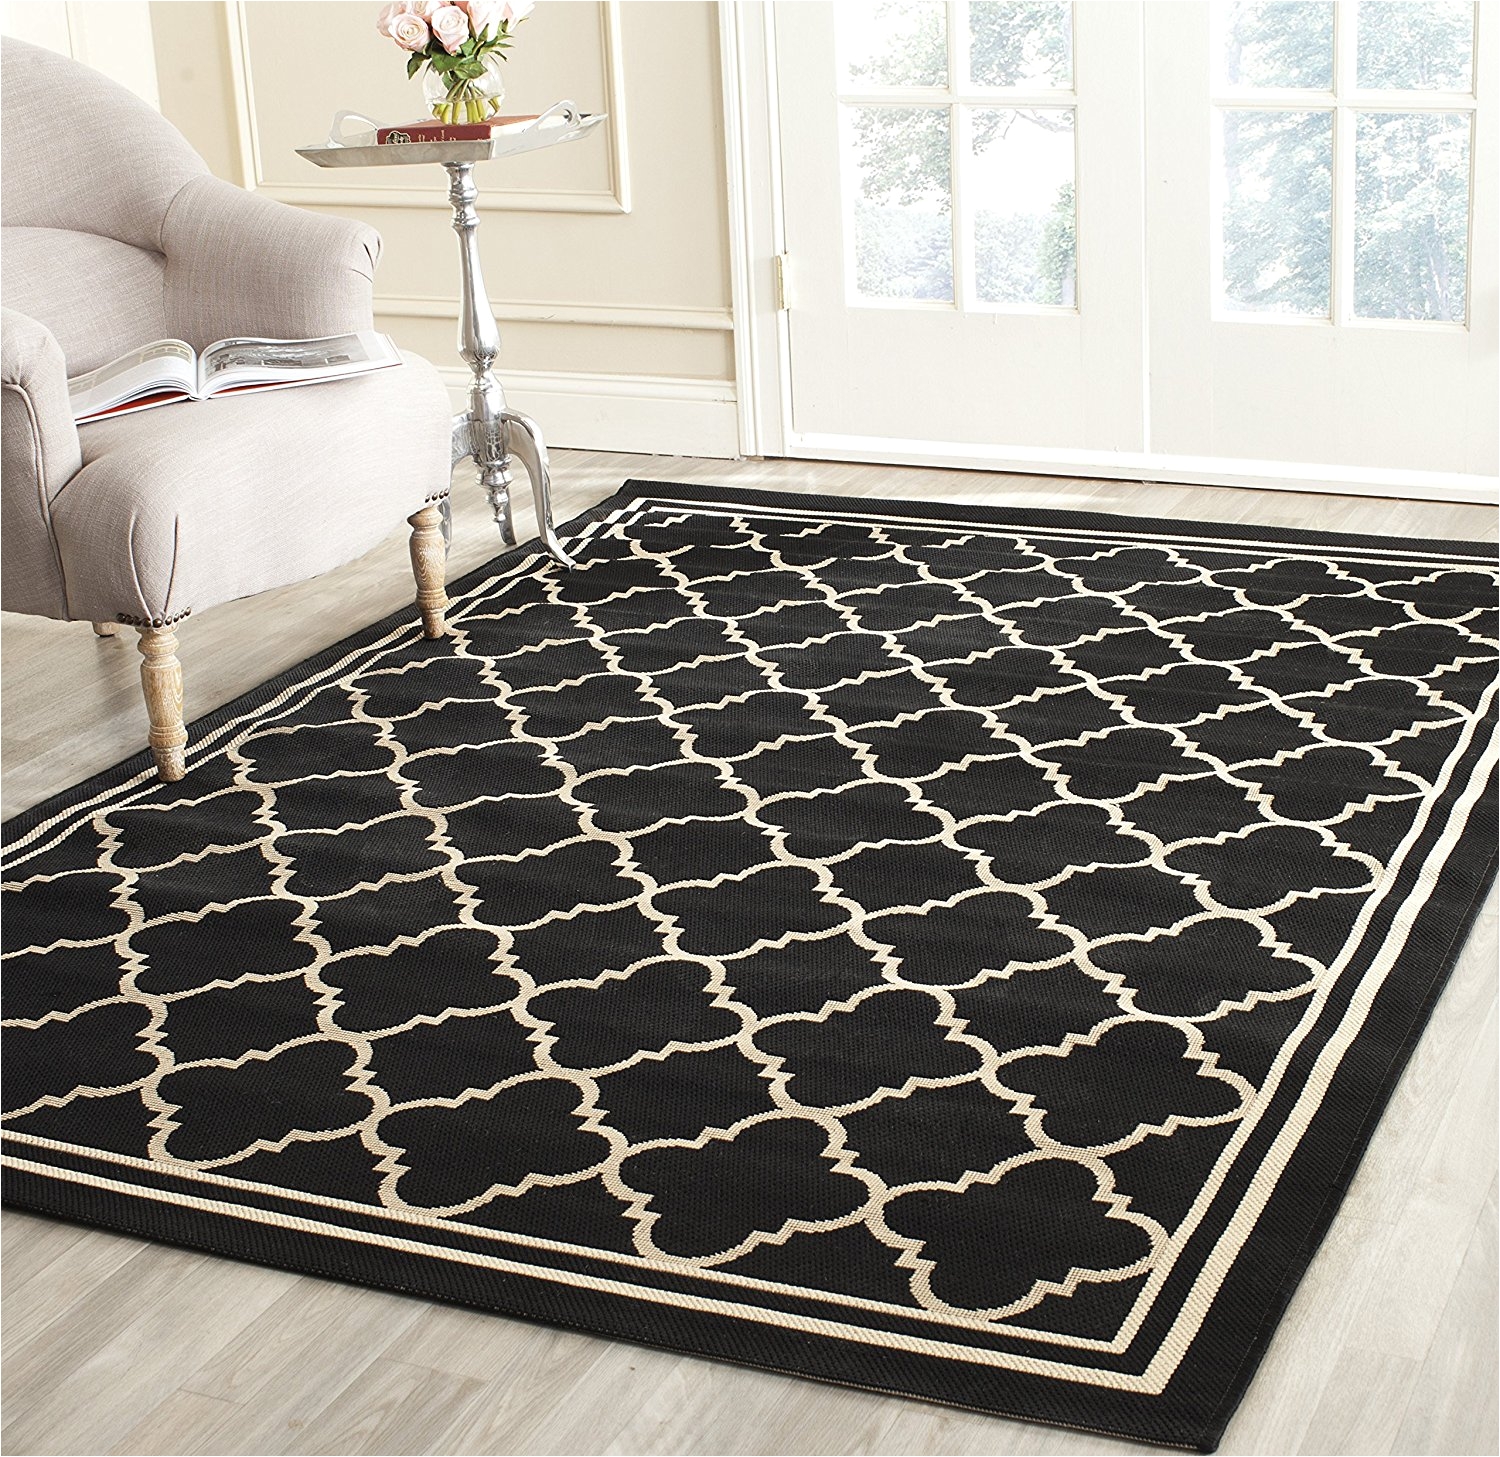 Home Depot Outdoor Rugs 9×12 Fire Resistant Rugs Home Depot Rug Designs